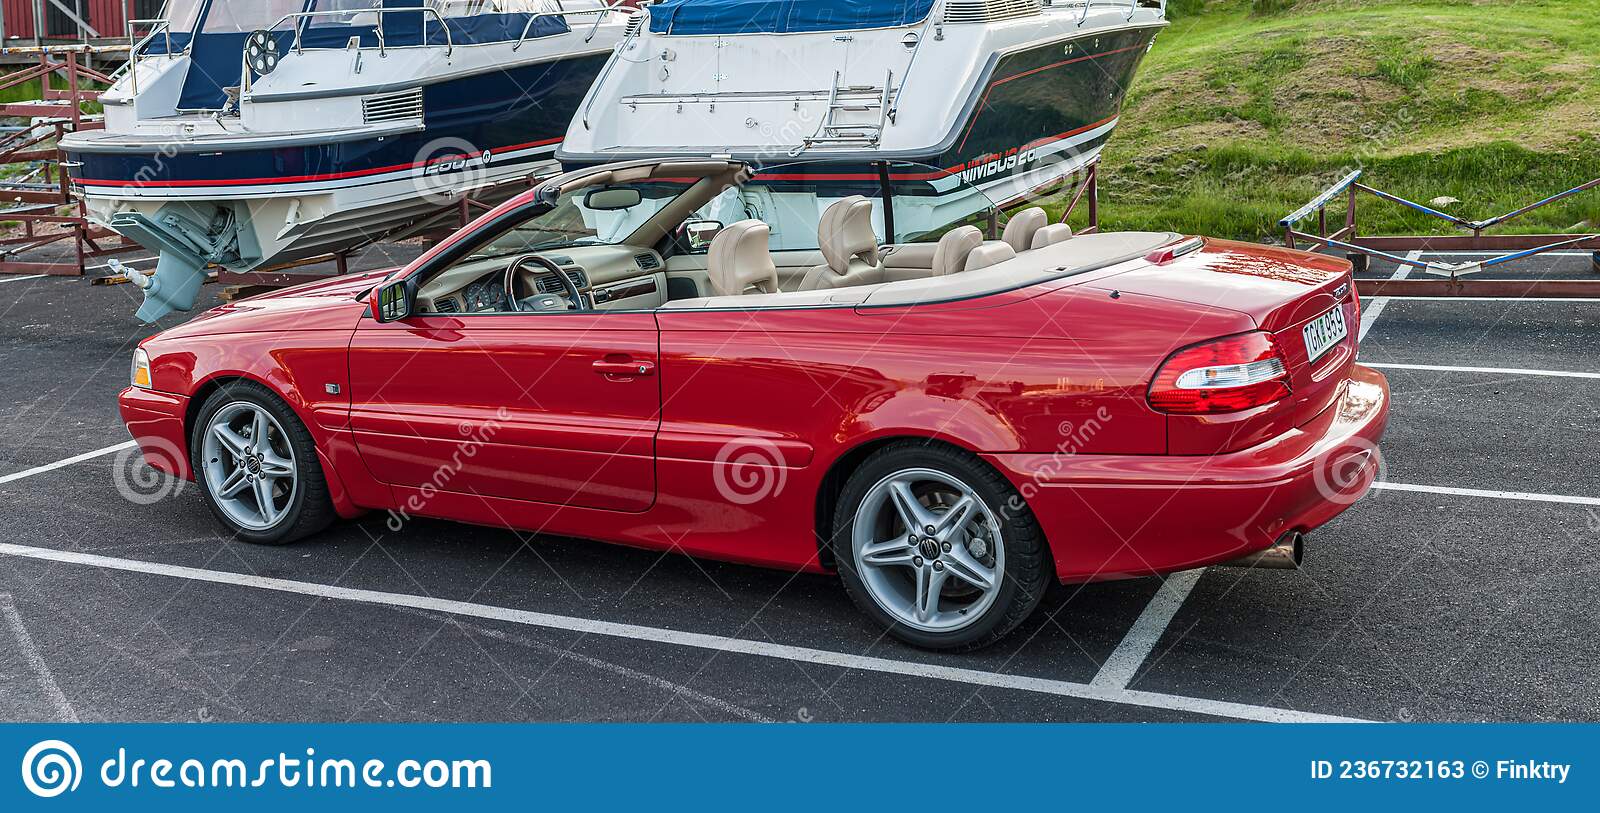 Volvo C70 I Cabriolet 2.3 T-5 2002 at a Marina Editorial Stock Photo -  Image of luxury, antique: 236732163